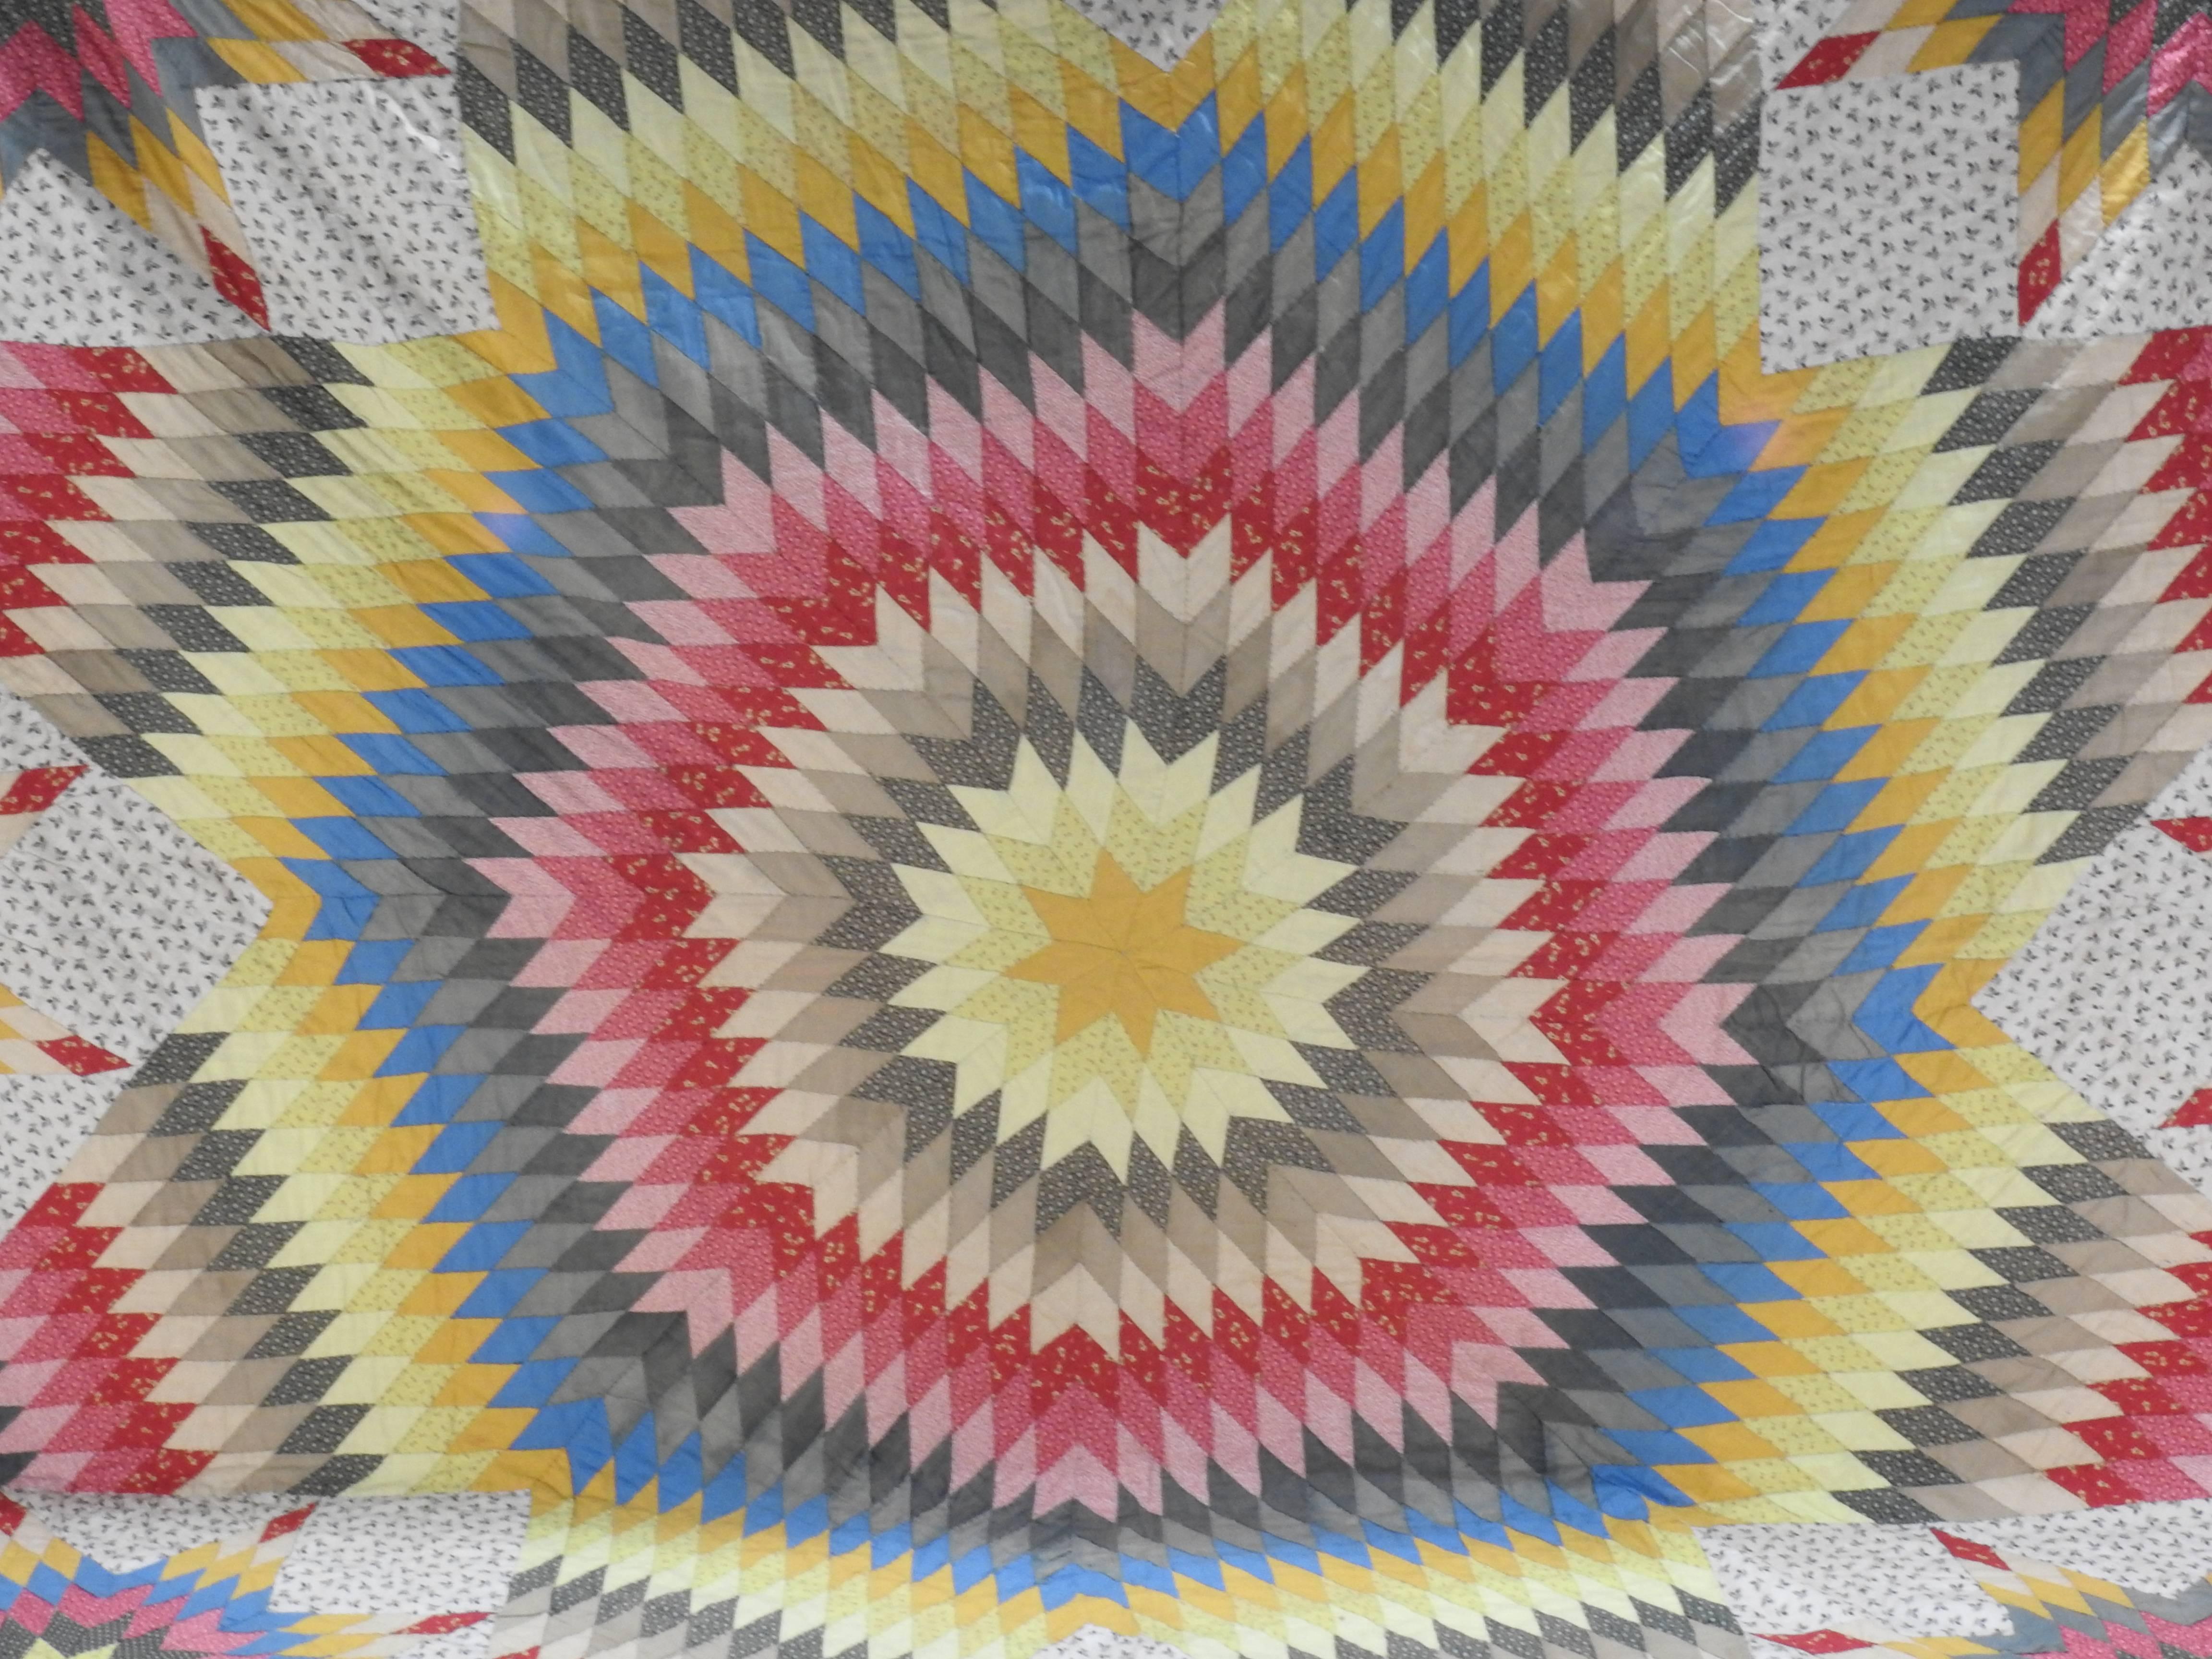 Vibrant colors make up this beautiful handmade vintage quilt. This quilt features a large star design in the center of the quilt with small stars between each of the eight points on the star. This design is made of a variety of colored cotton blend